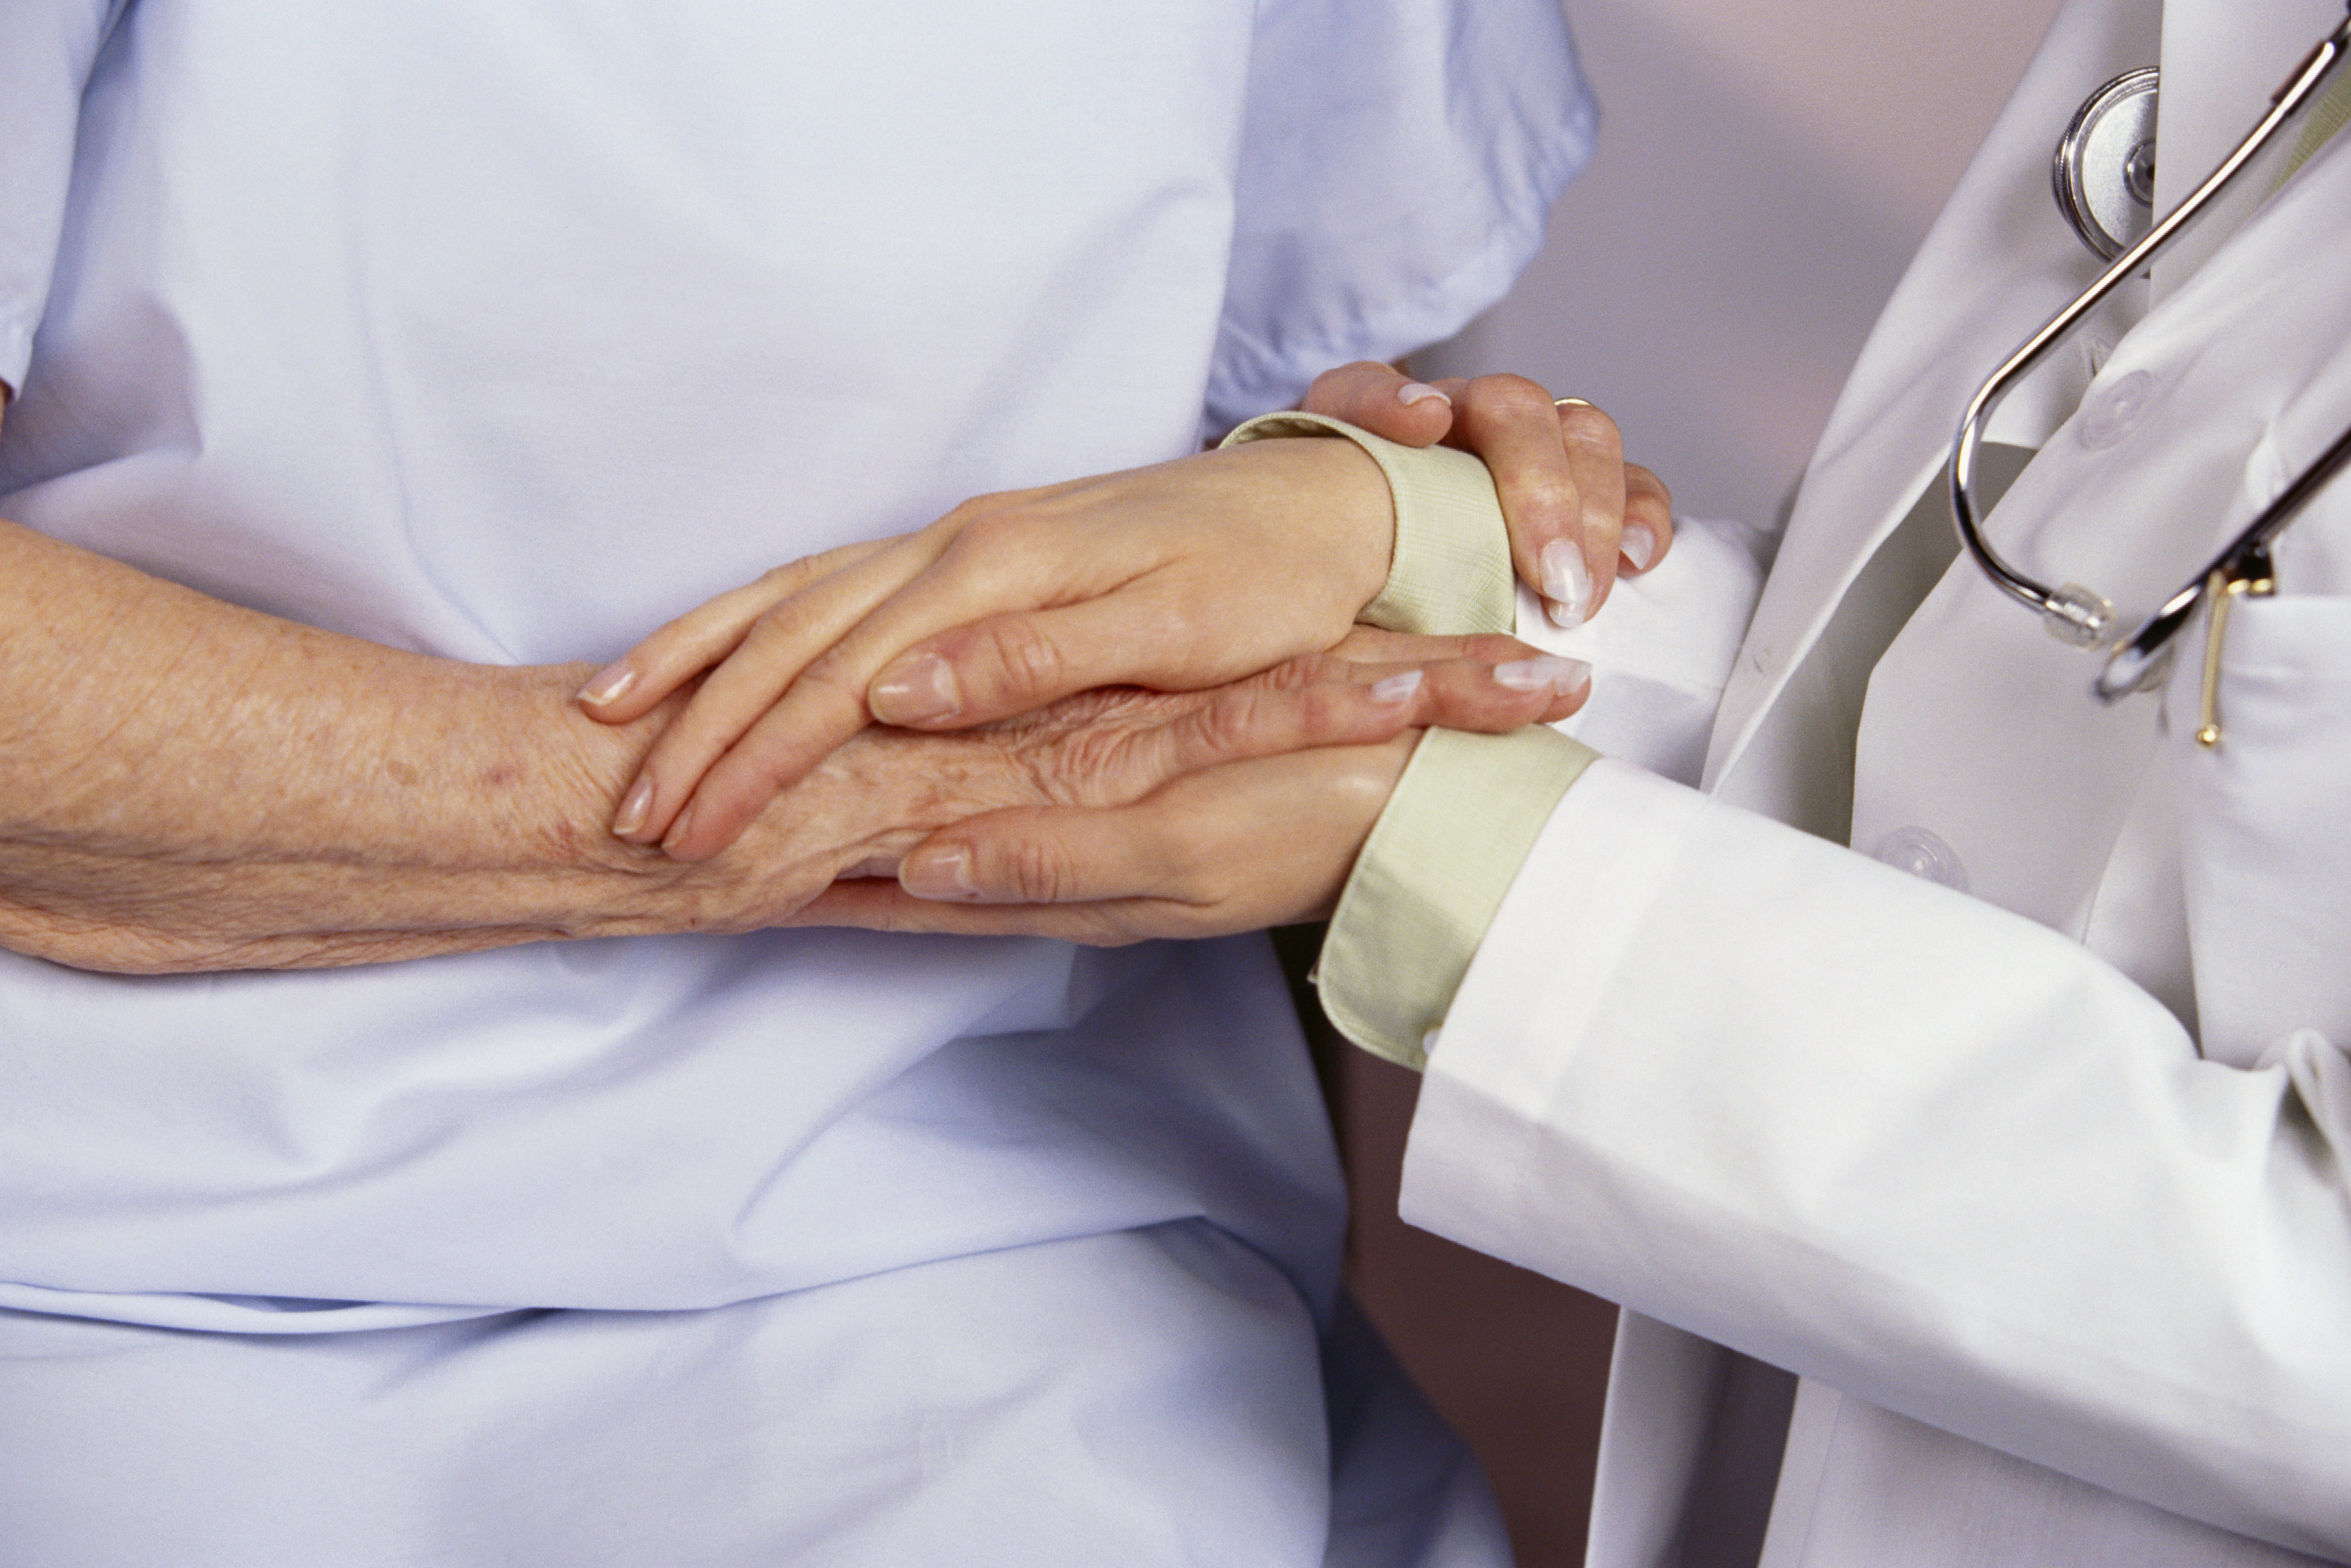 A doctor holding hands with a patient. | Source: Getty Images